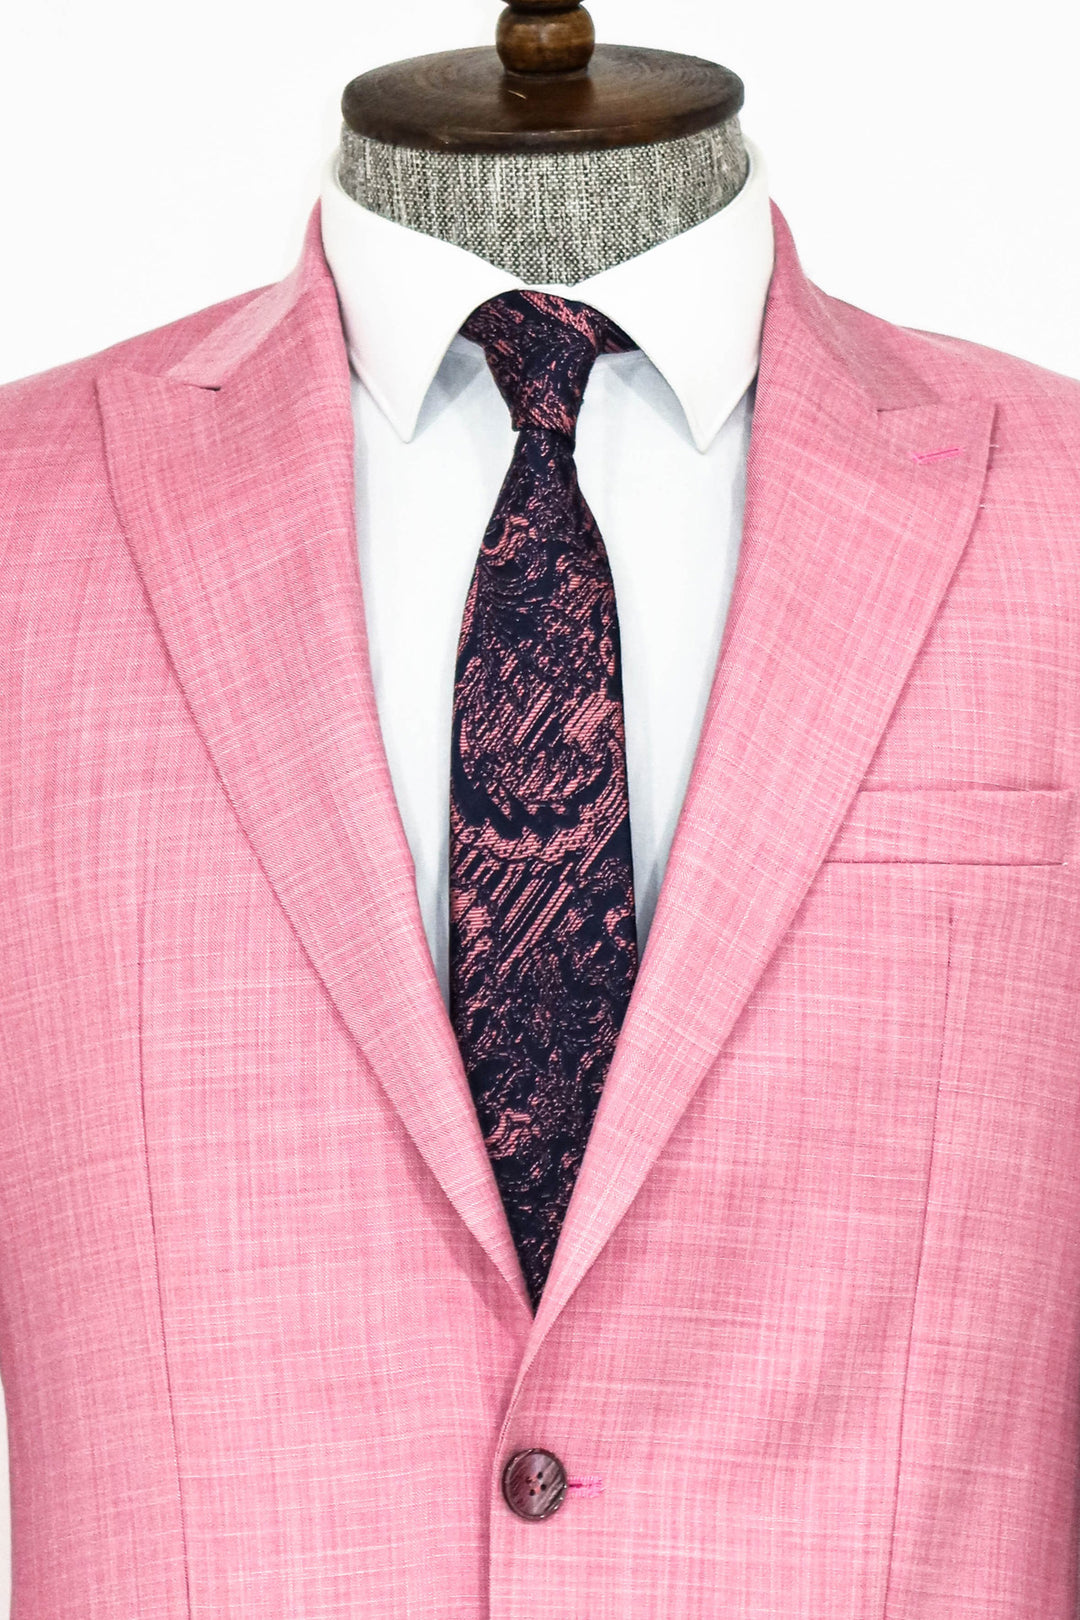 Patterned 2 Piece Slim Fit Pink Men Suit and Shirt Combination - Wessi